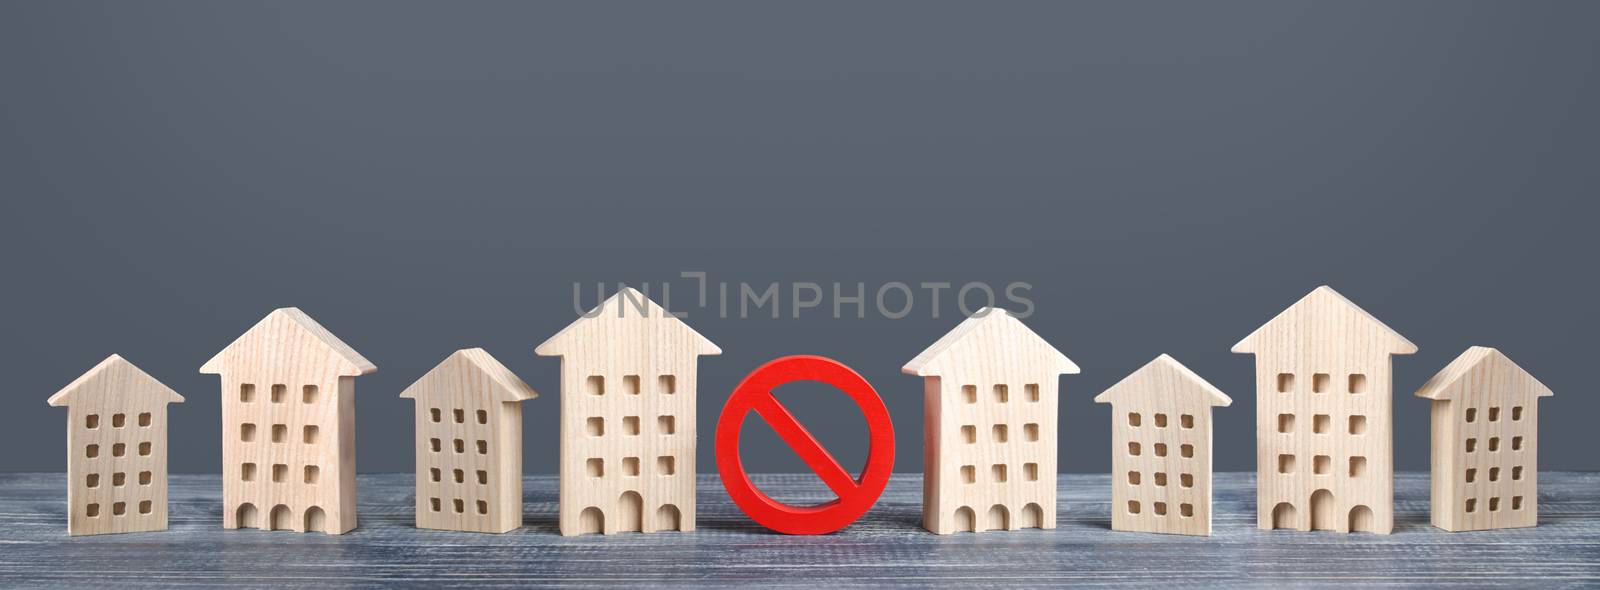 A red prohibition sign no stands among residential buildings. Restrictions ban on construction. Inaccessible expensive housing. Restriction building compaction. Underdeveloped infrastructure utilities